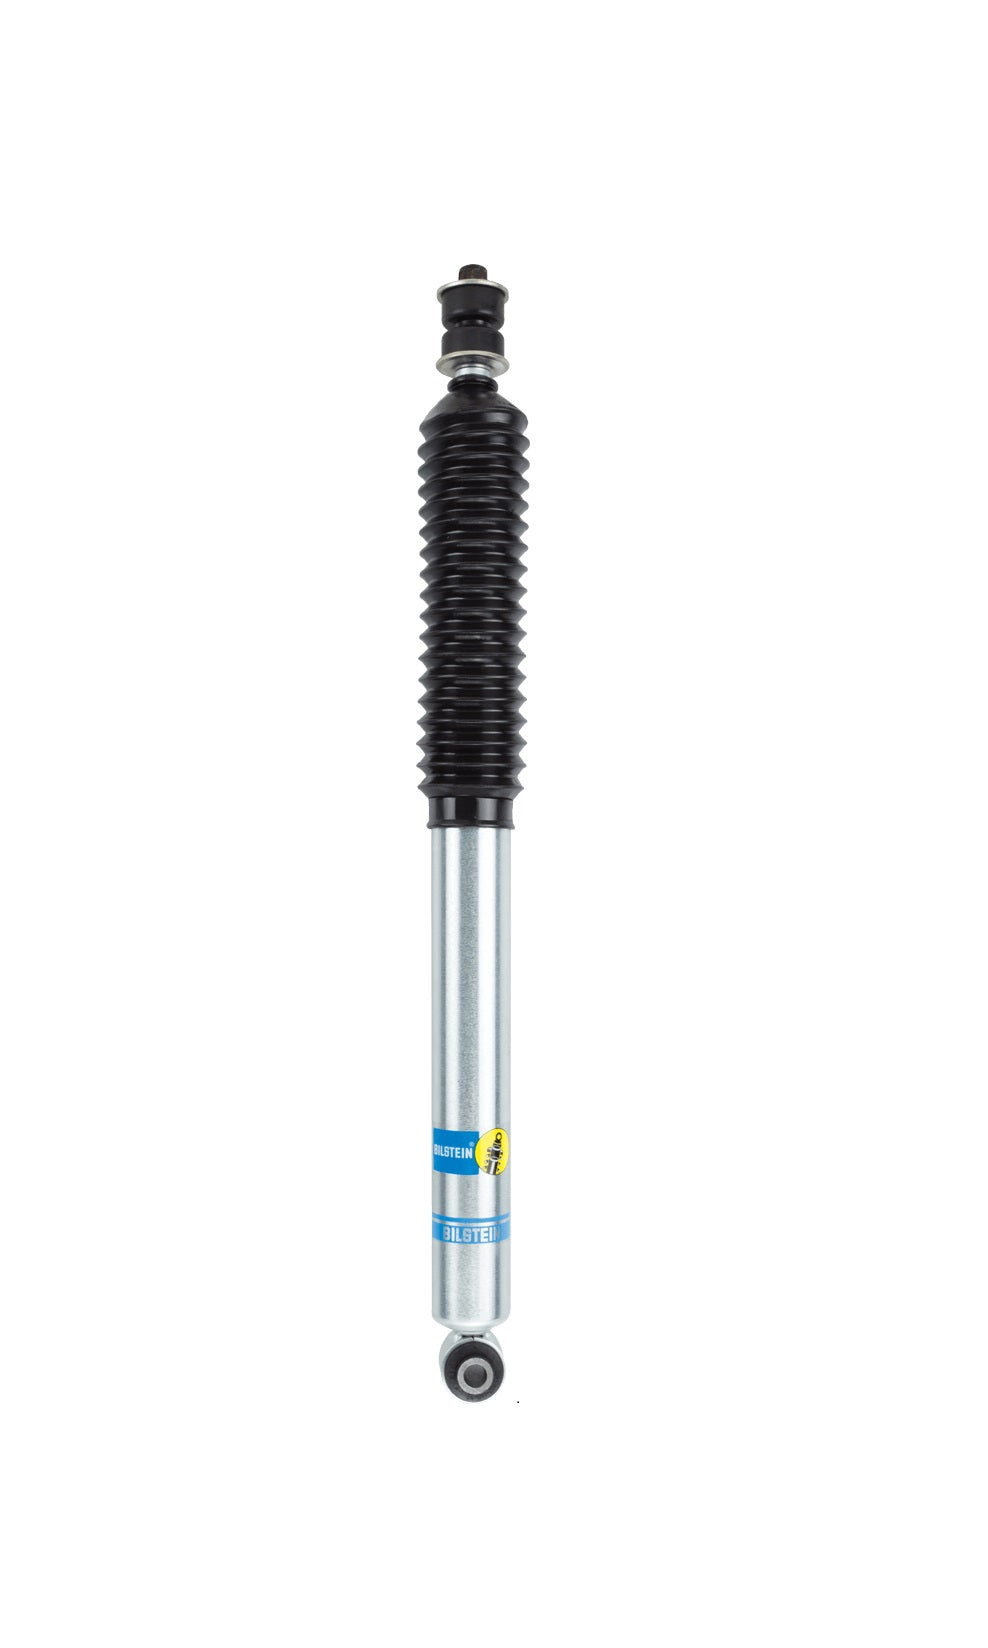 Bilstein B8 5100(Ride Height Adjustable) For Ford F-150